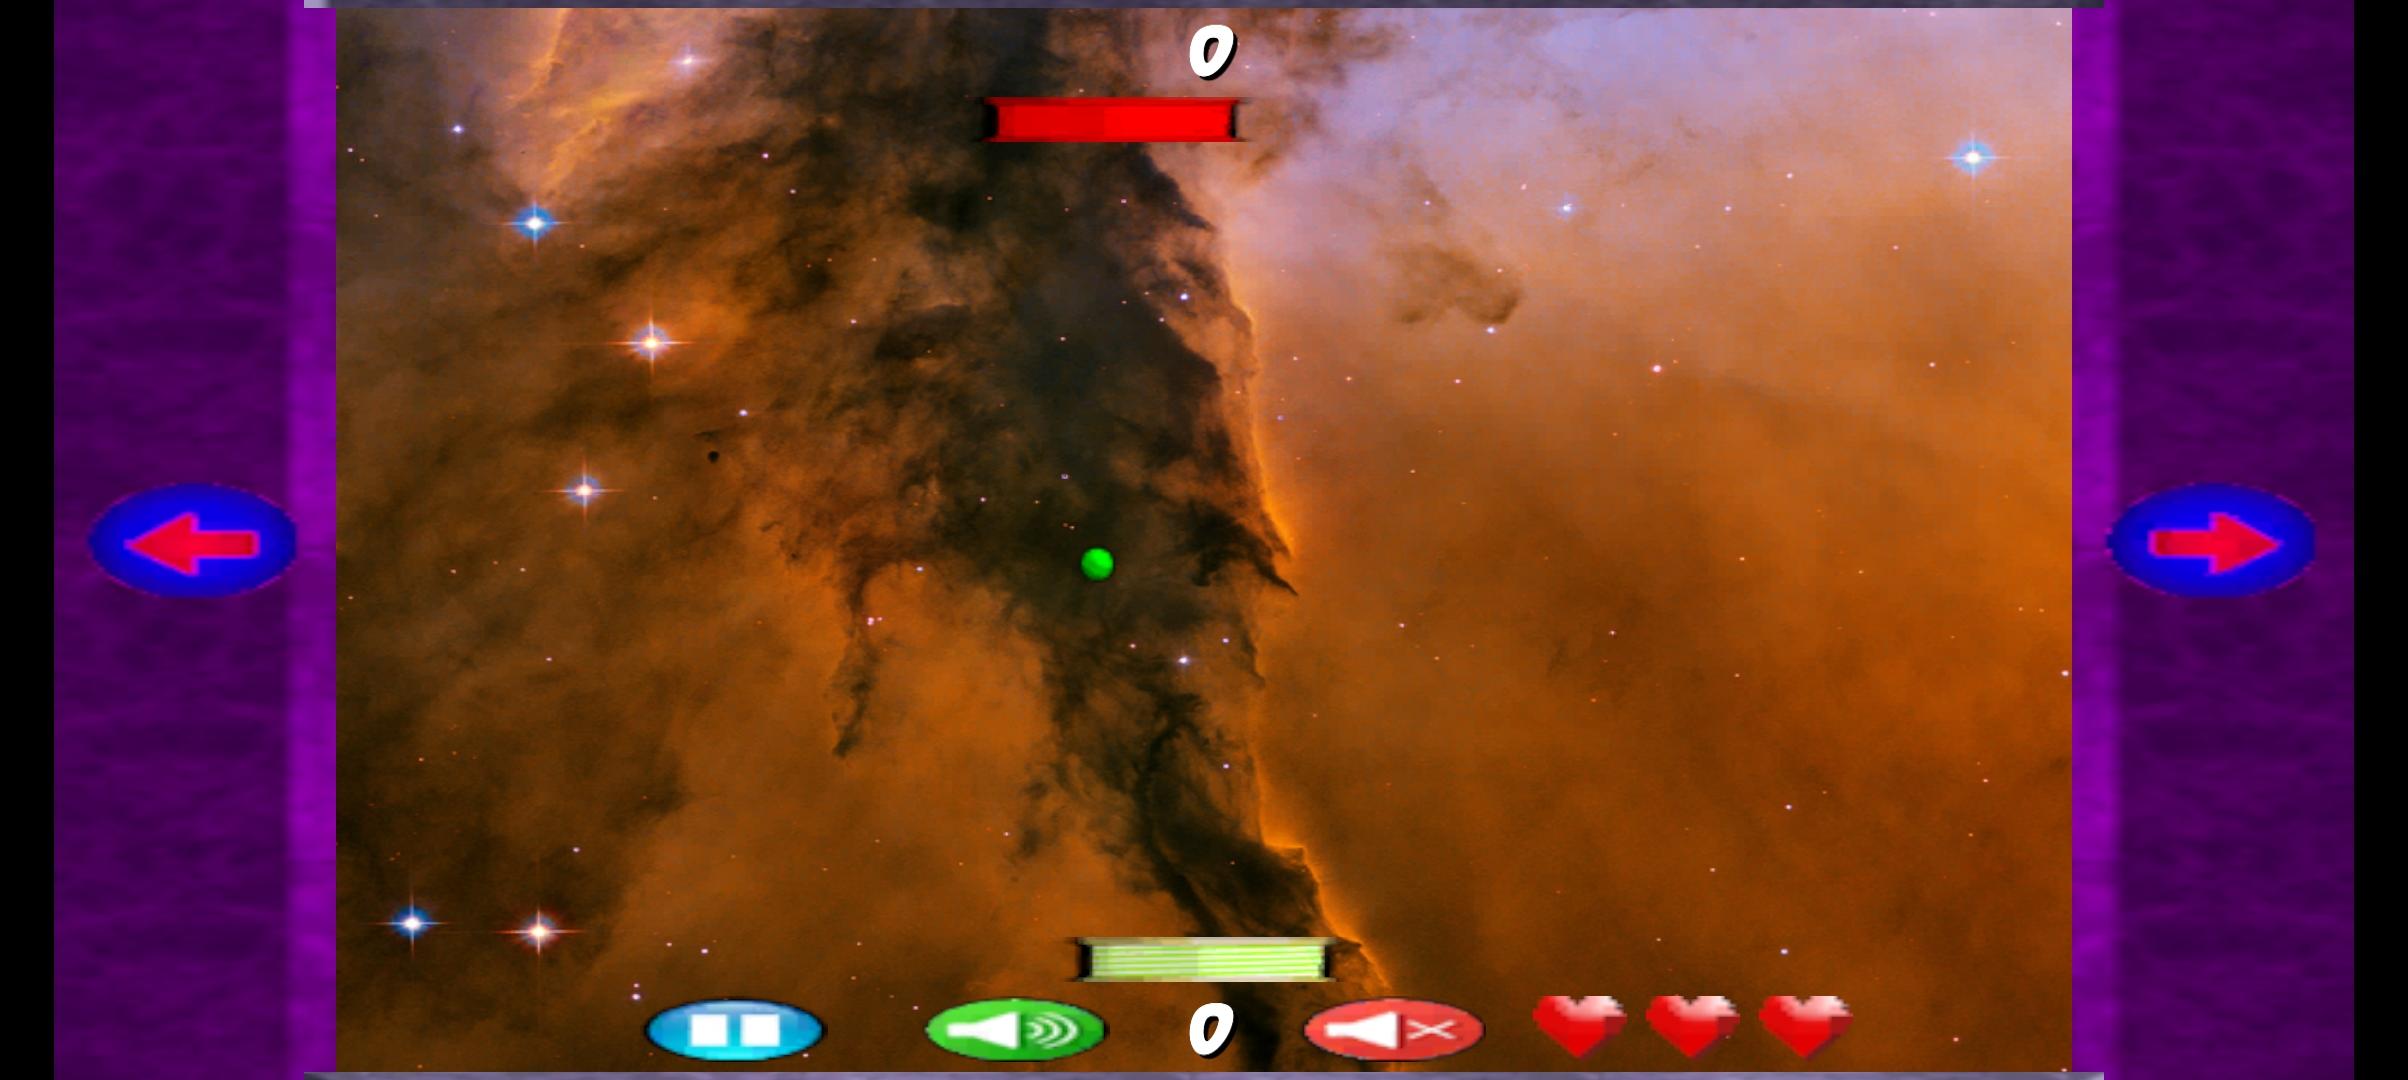 Screenshot of One Touch